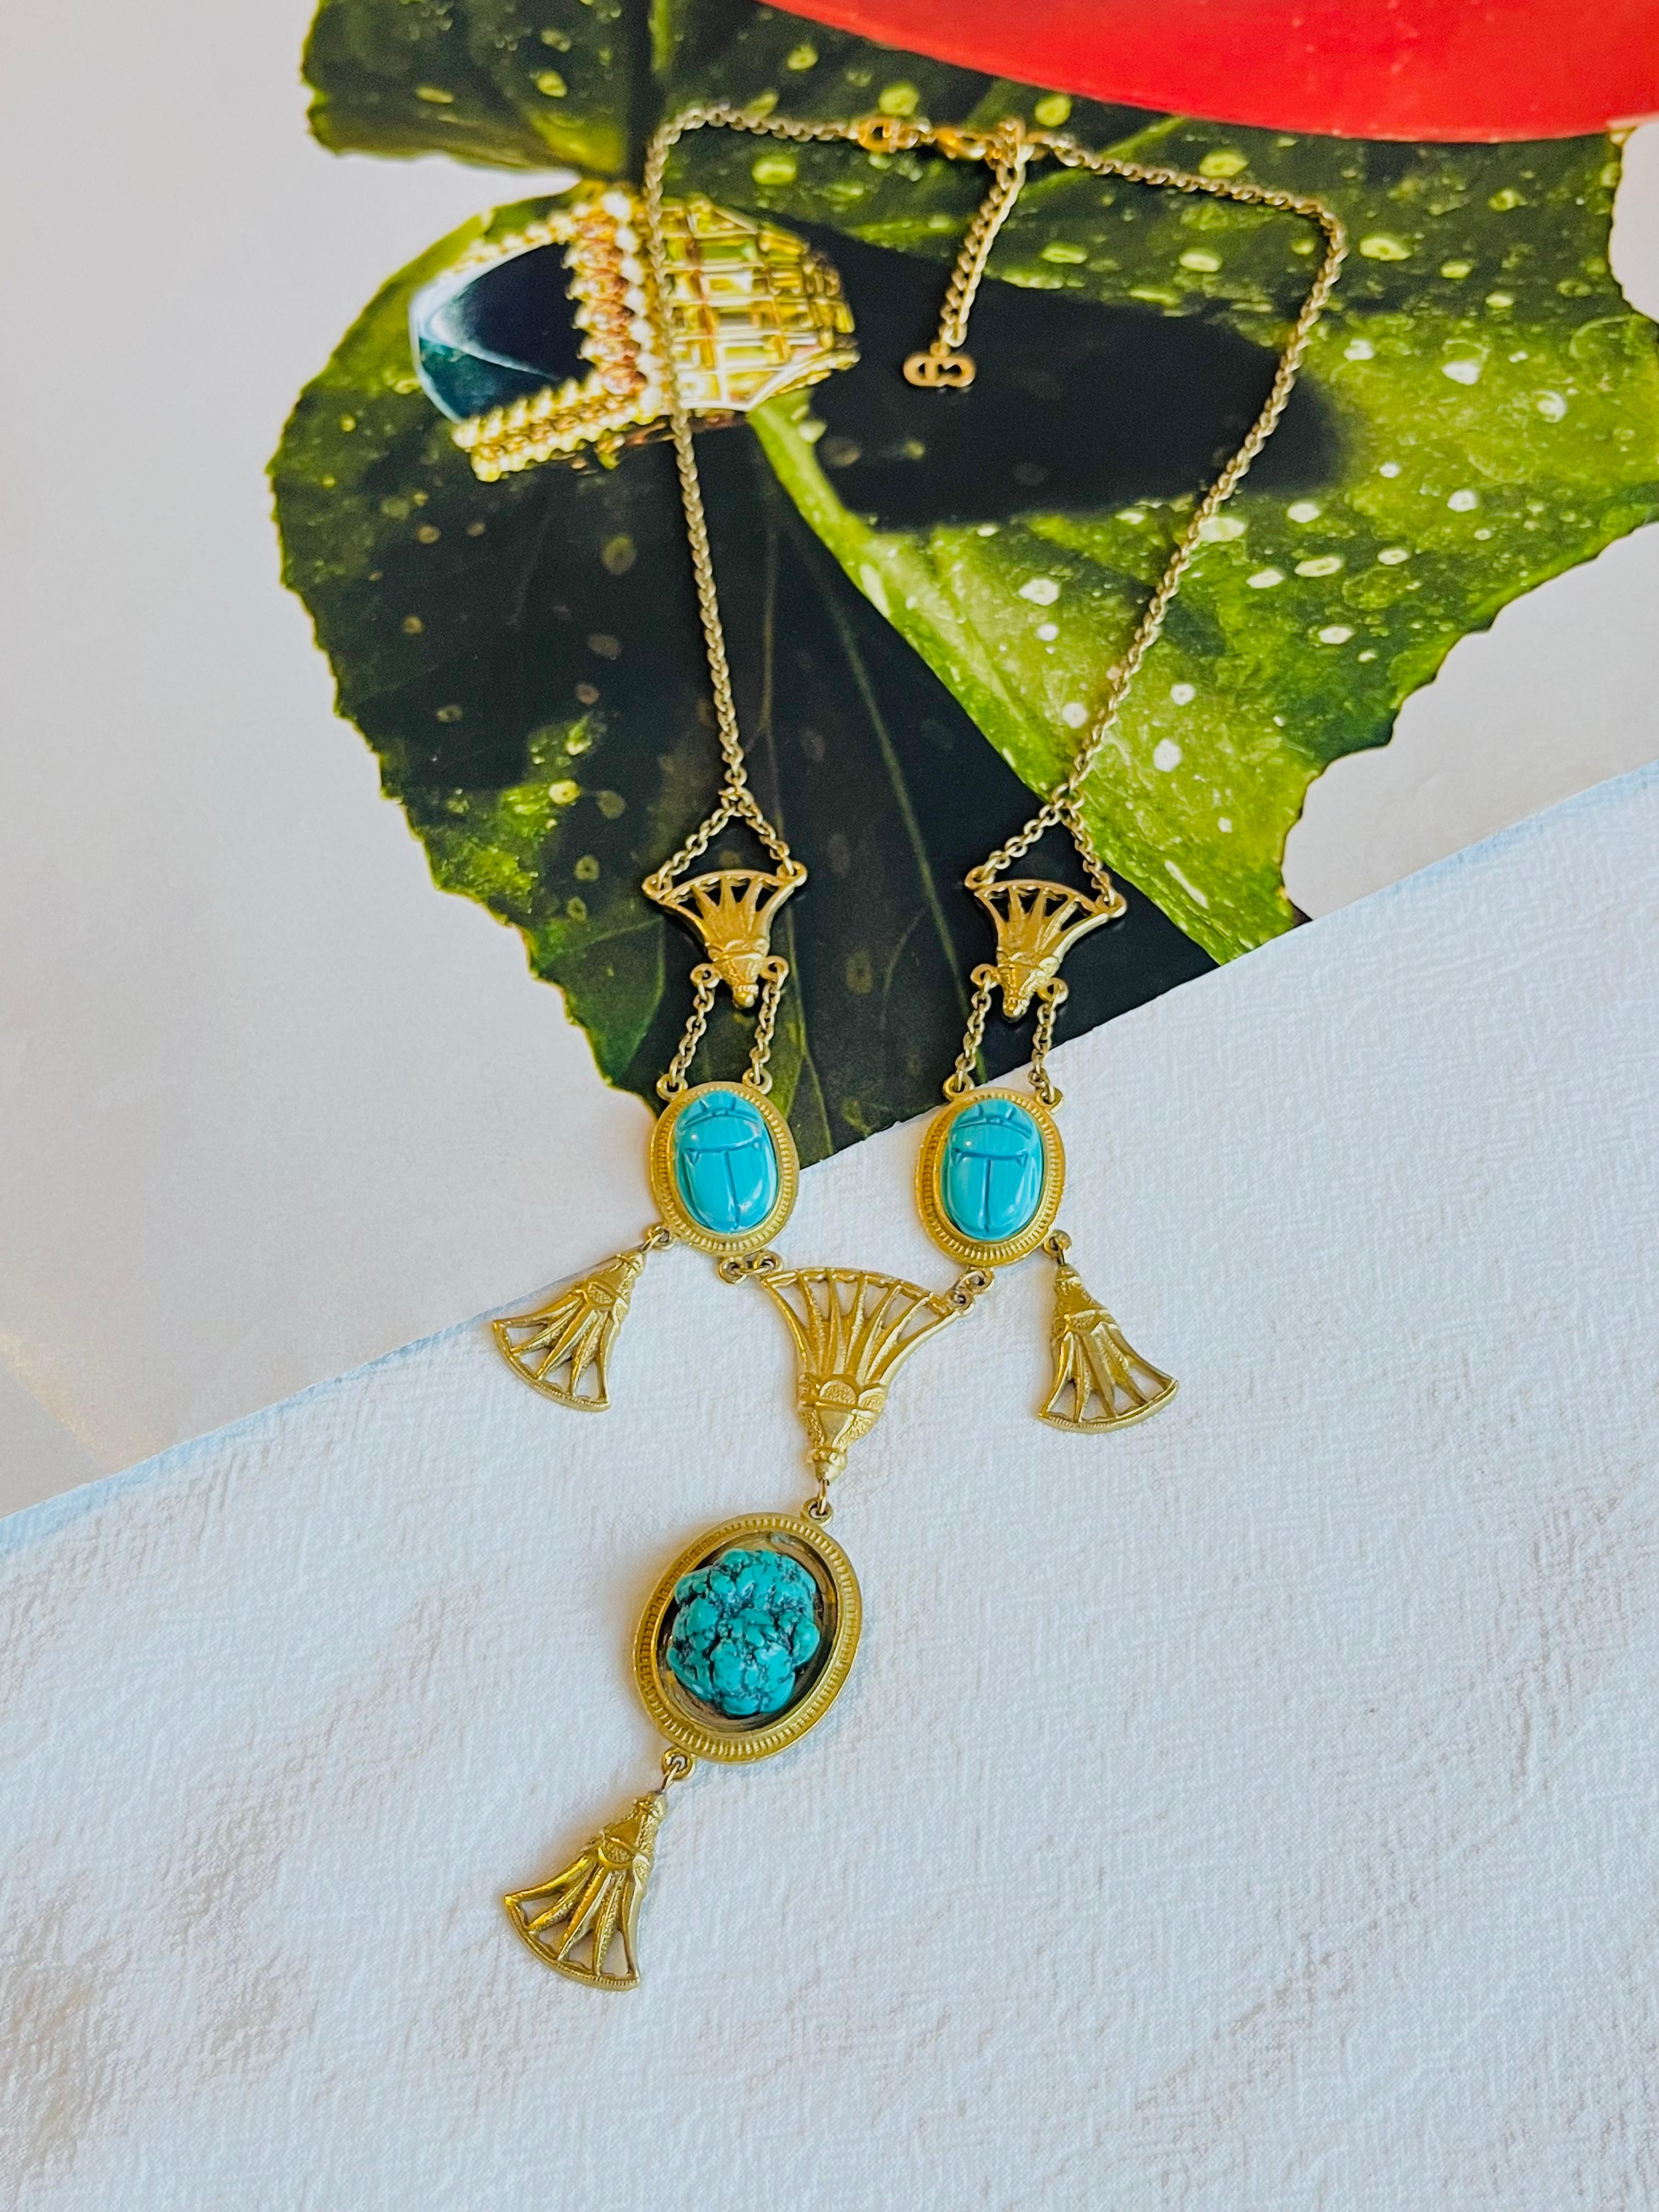 Christian Dior Vintage Egyptian Revival Turquoise Chandelier Fans Long Necklace In Good Condition For Sale In Wokingham, England